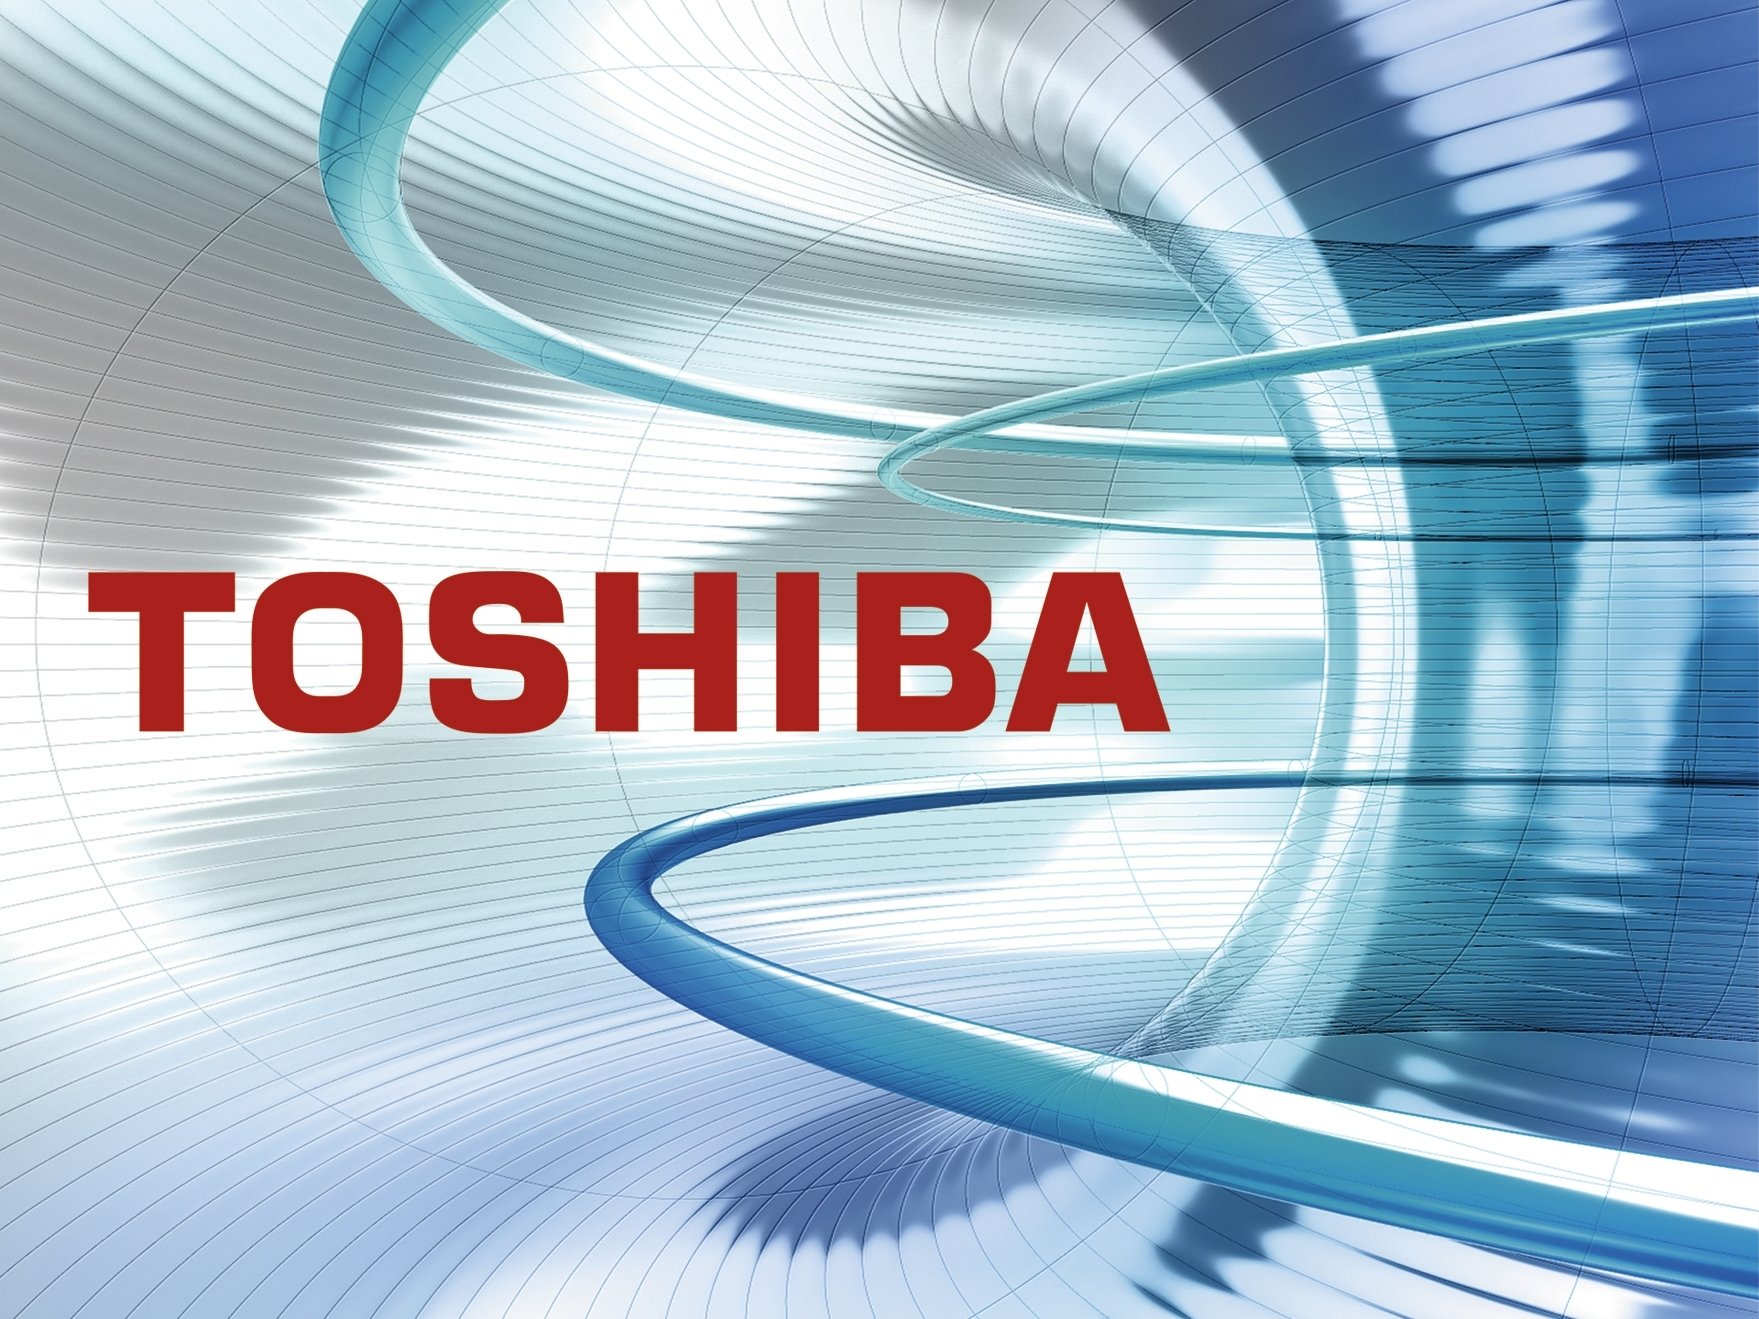 toshiba background pictures #20